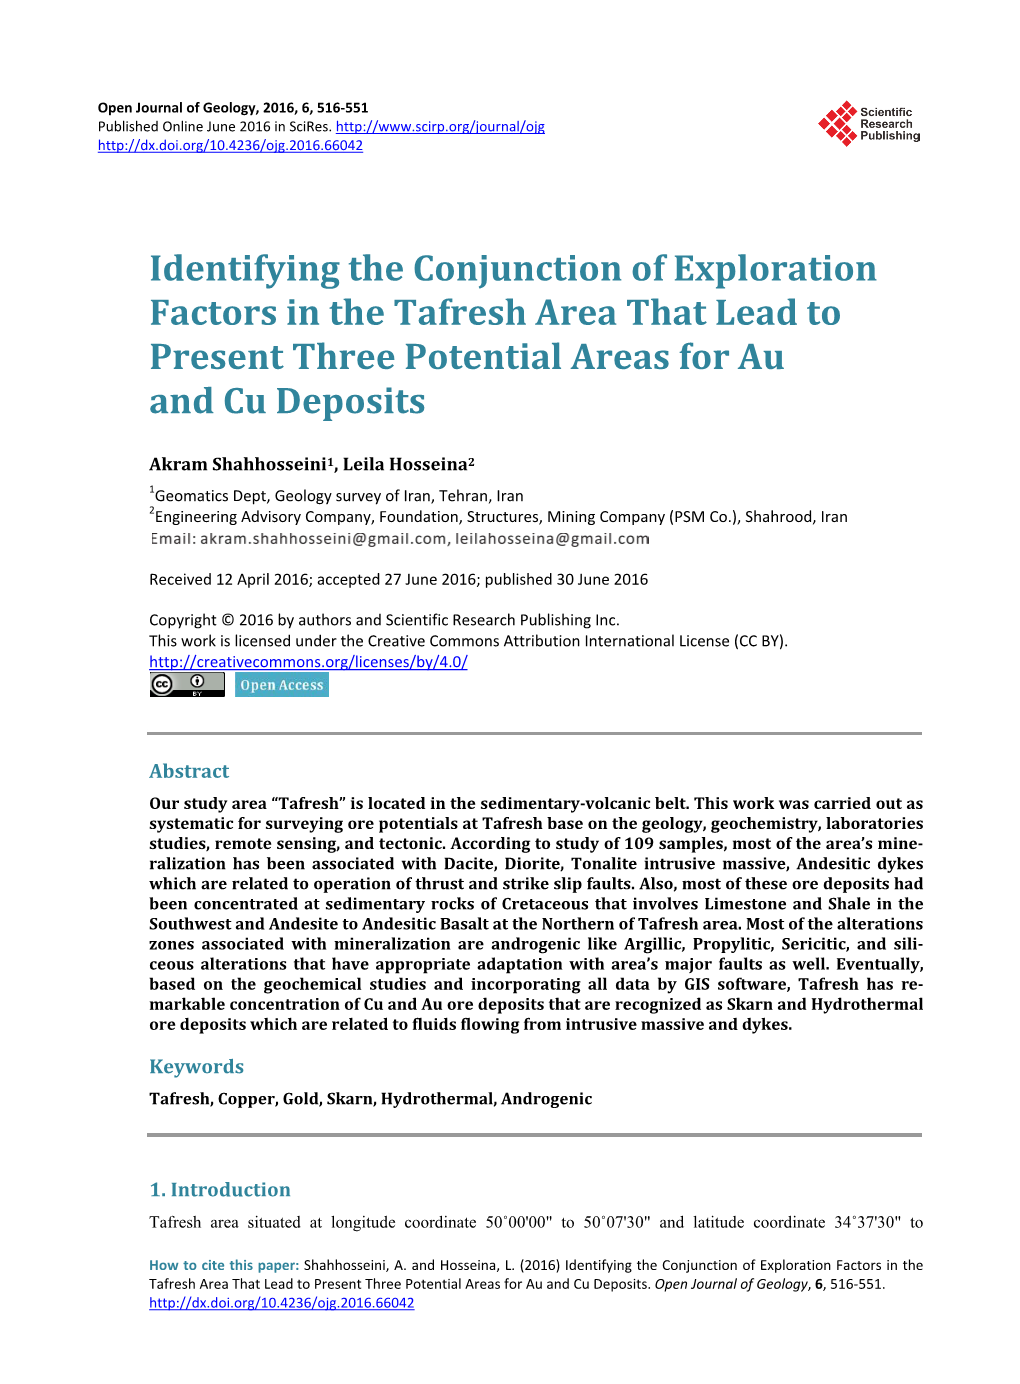 Identifying the Conjunction of Exploration Factors in the Tafresh Area That Lead to Present Three Potential Areas for Au and Cu Deposits